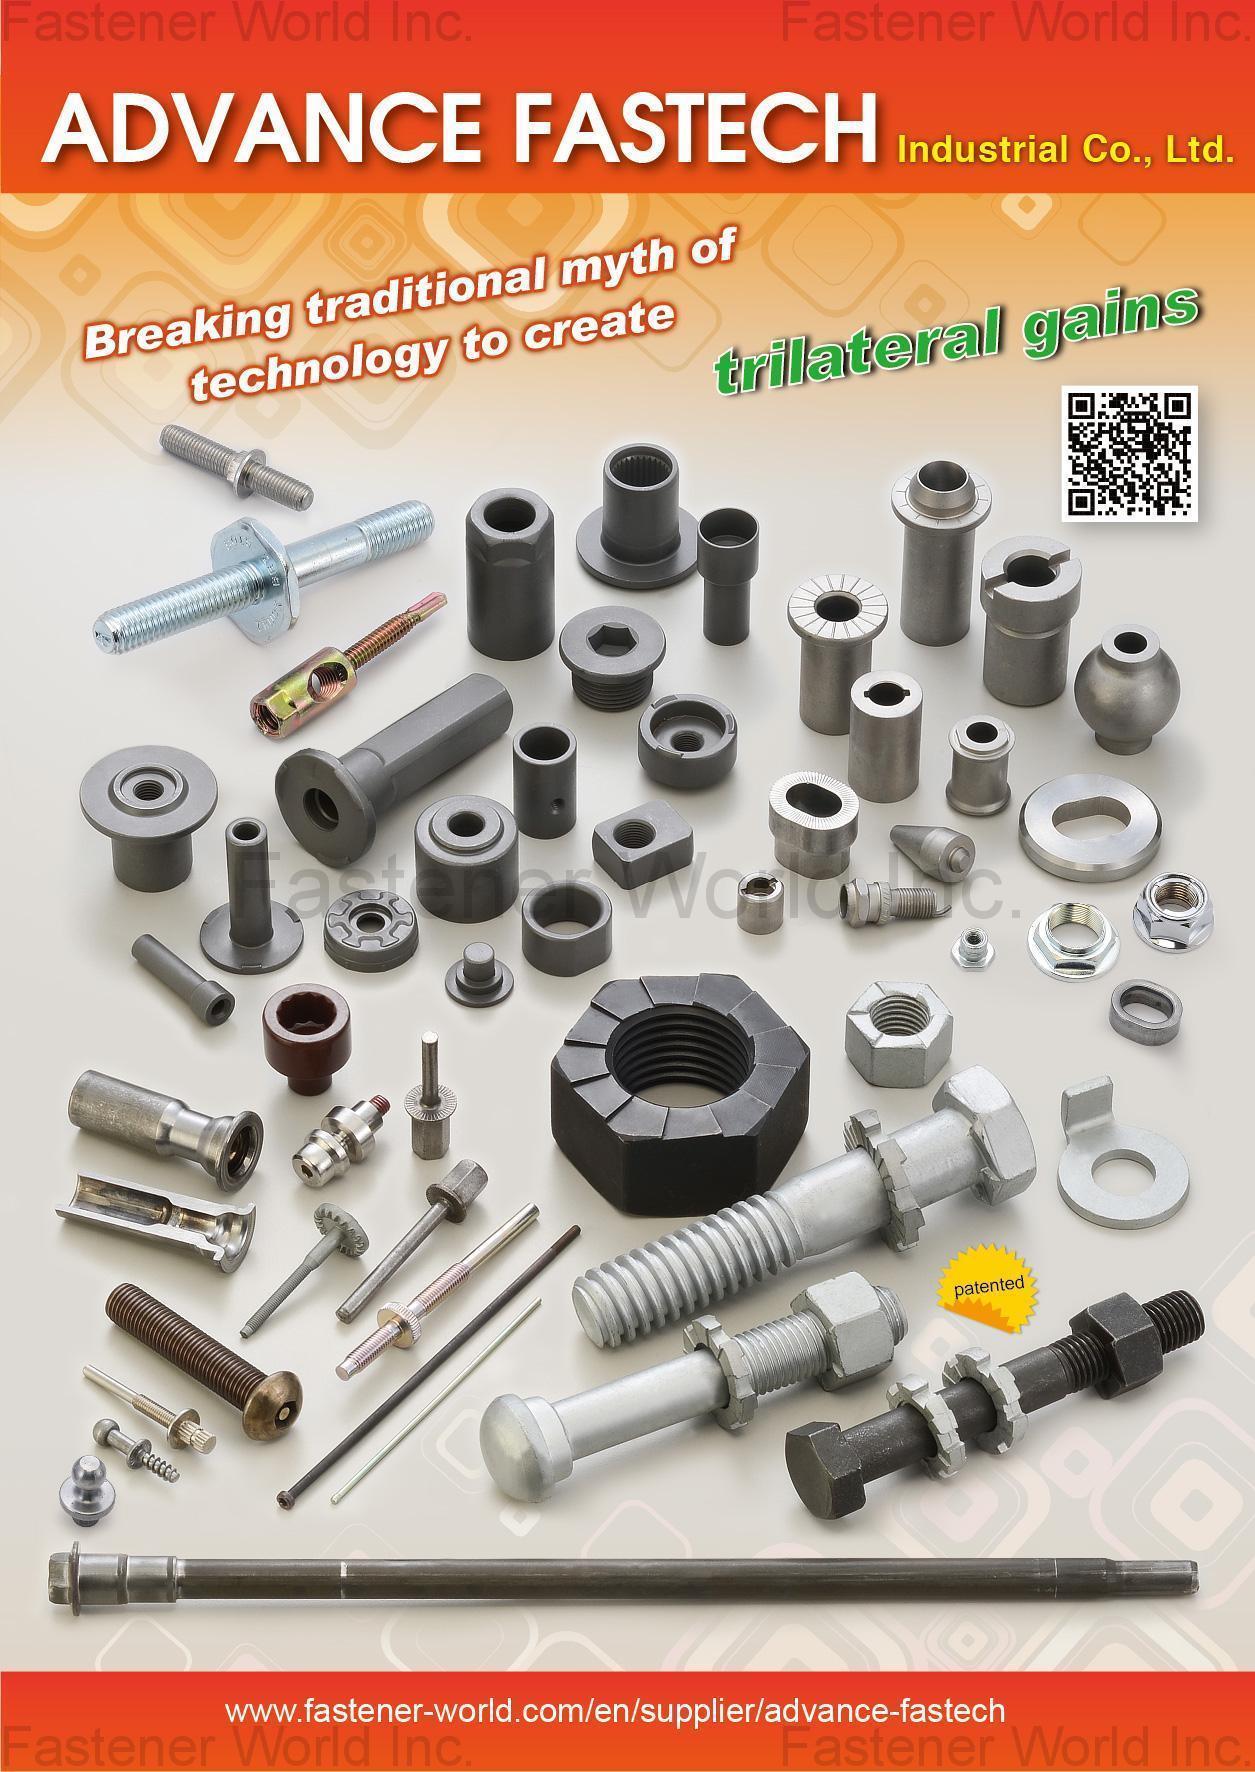 ADVANCE FASTECH INDUSTRIAL CO., LTD. , HWH Collated Screws, Toolings, Solar Fasteners,  Weld Nuts, Aircraft Nuts, Multi-stroke Rivets, Weld Nuts, Wheel Nuts